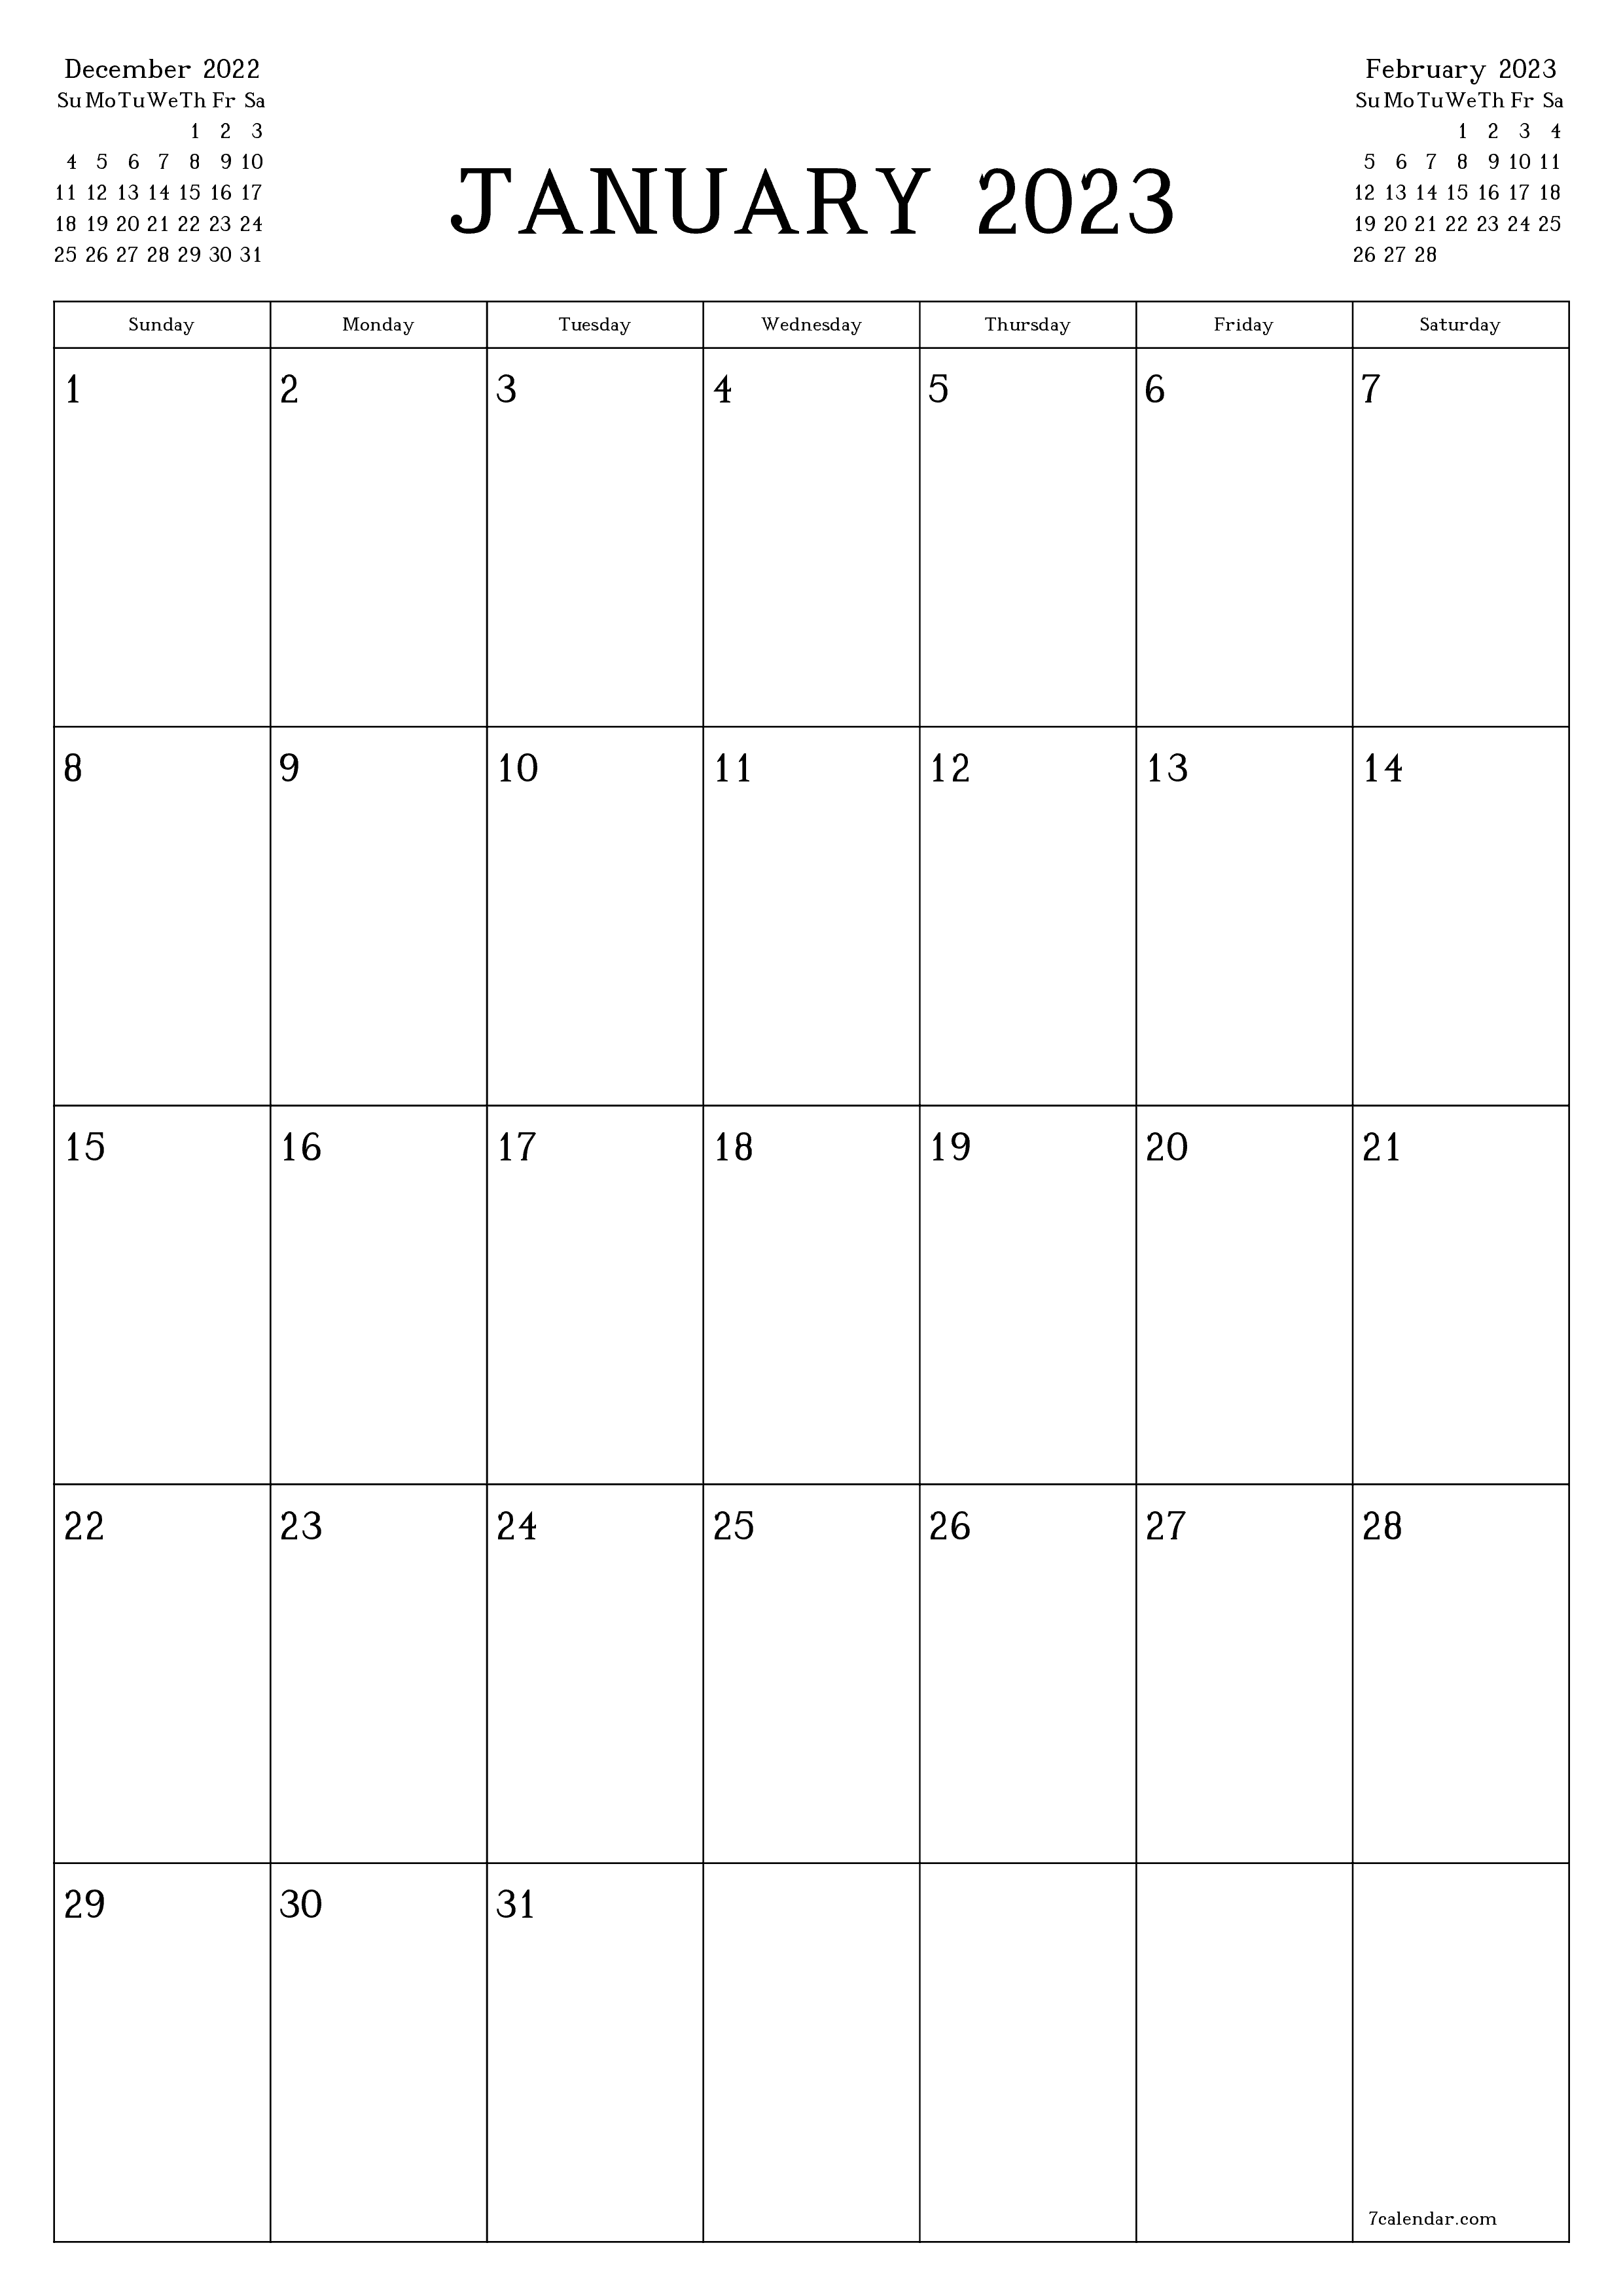 Blank monthly calendar planner for month January 2023 with notes save and print to PDF PNG English - 7calendar.com